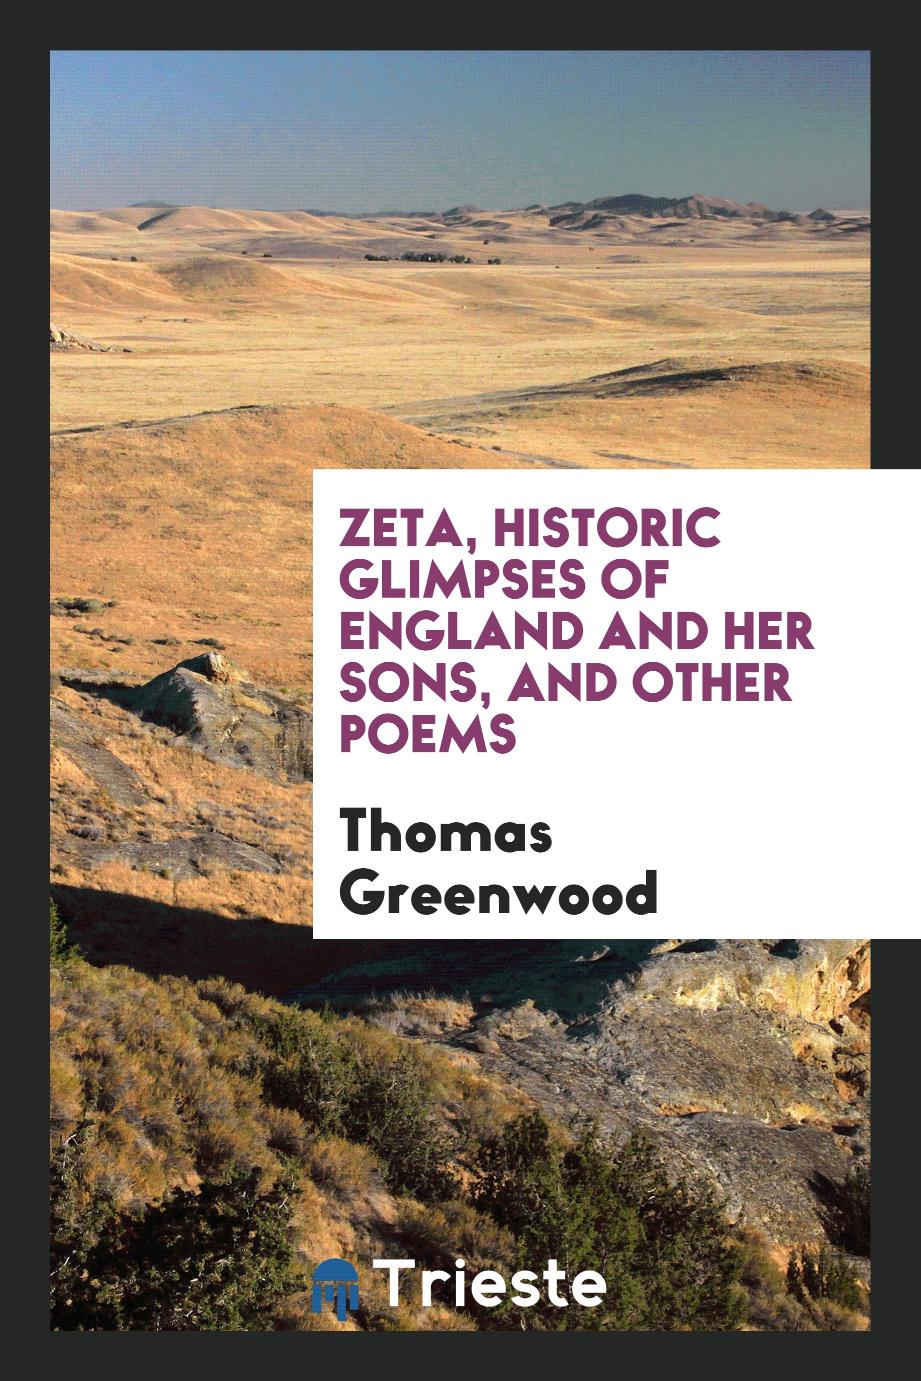 Zeta, Historic Glimpses of England and Her Sons, and Other Poems